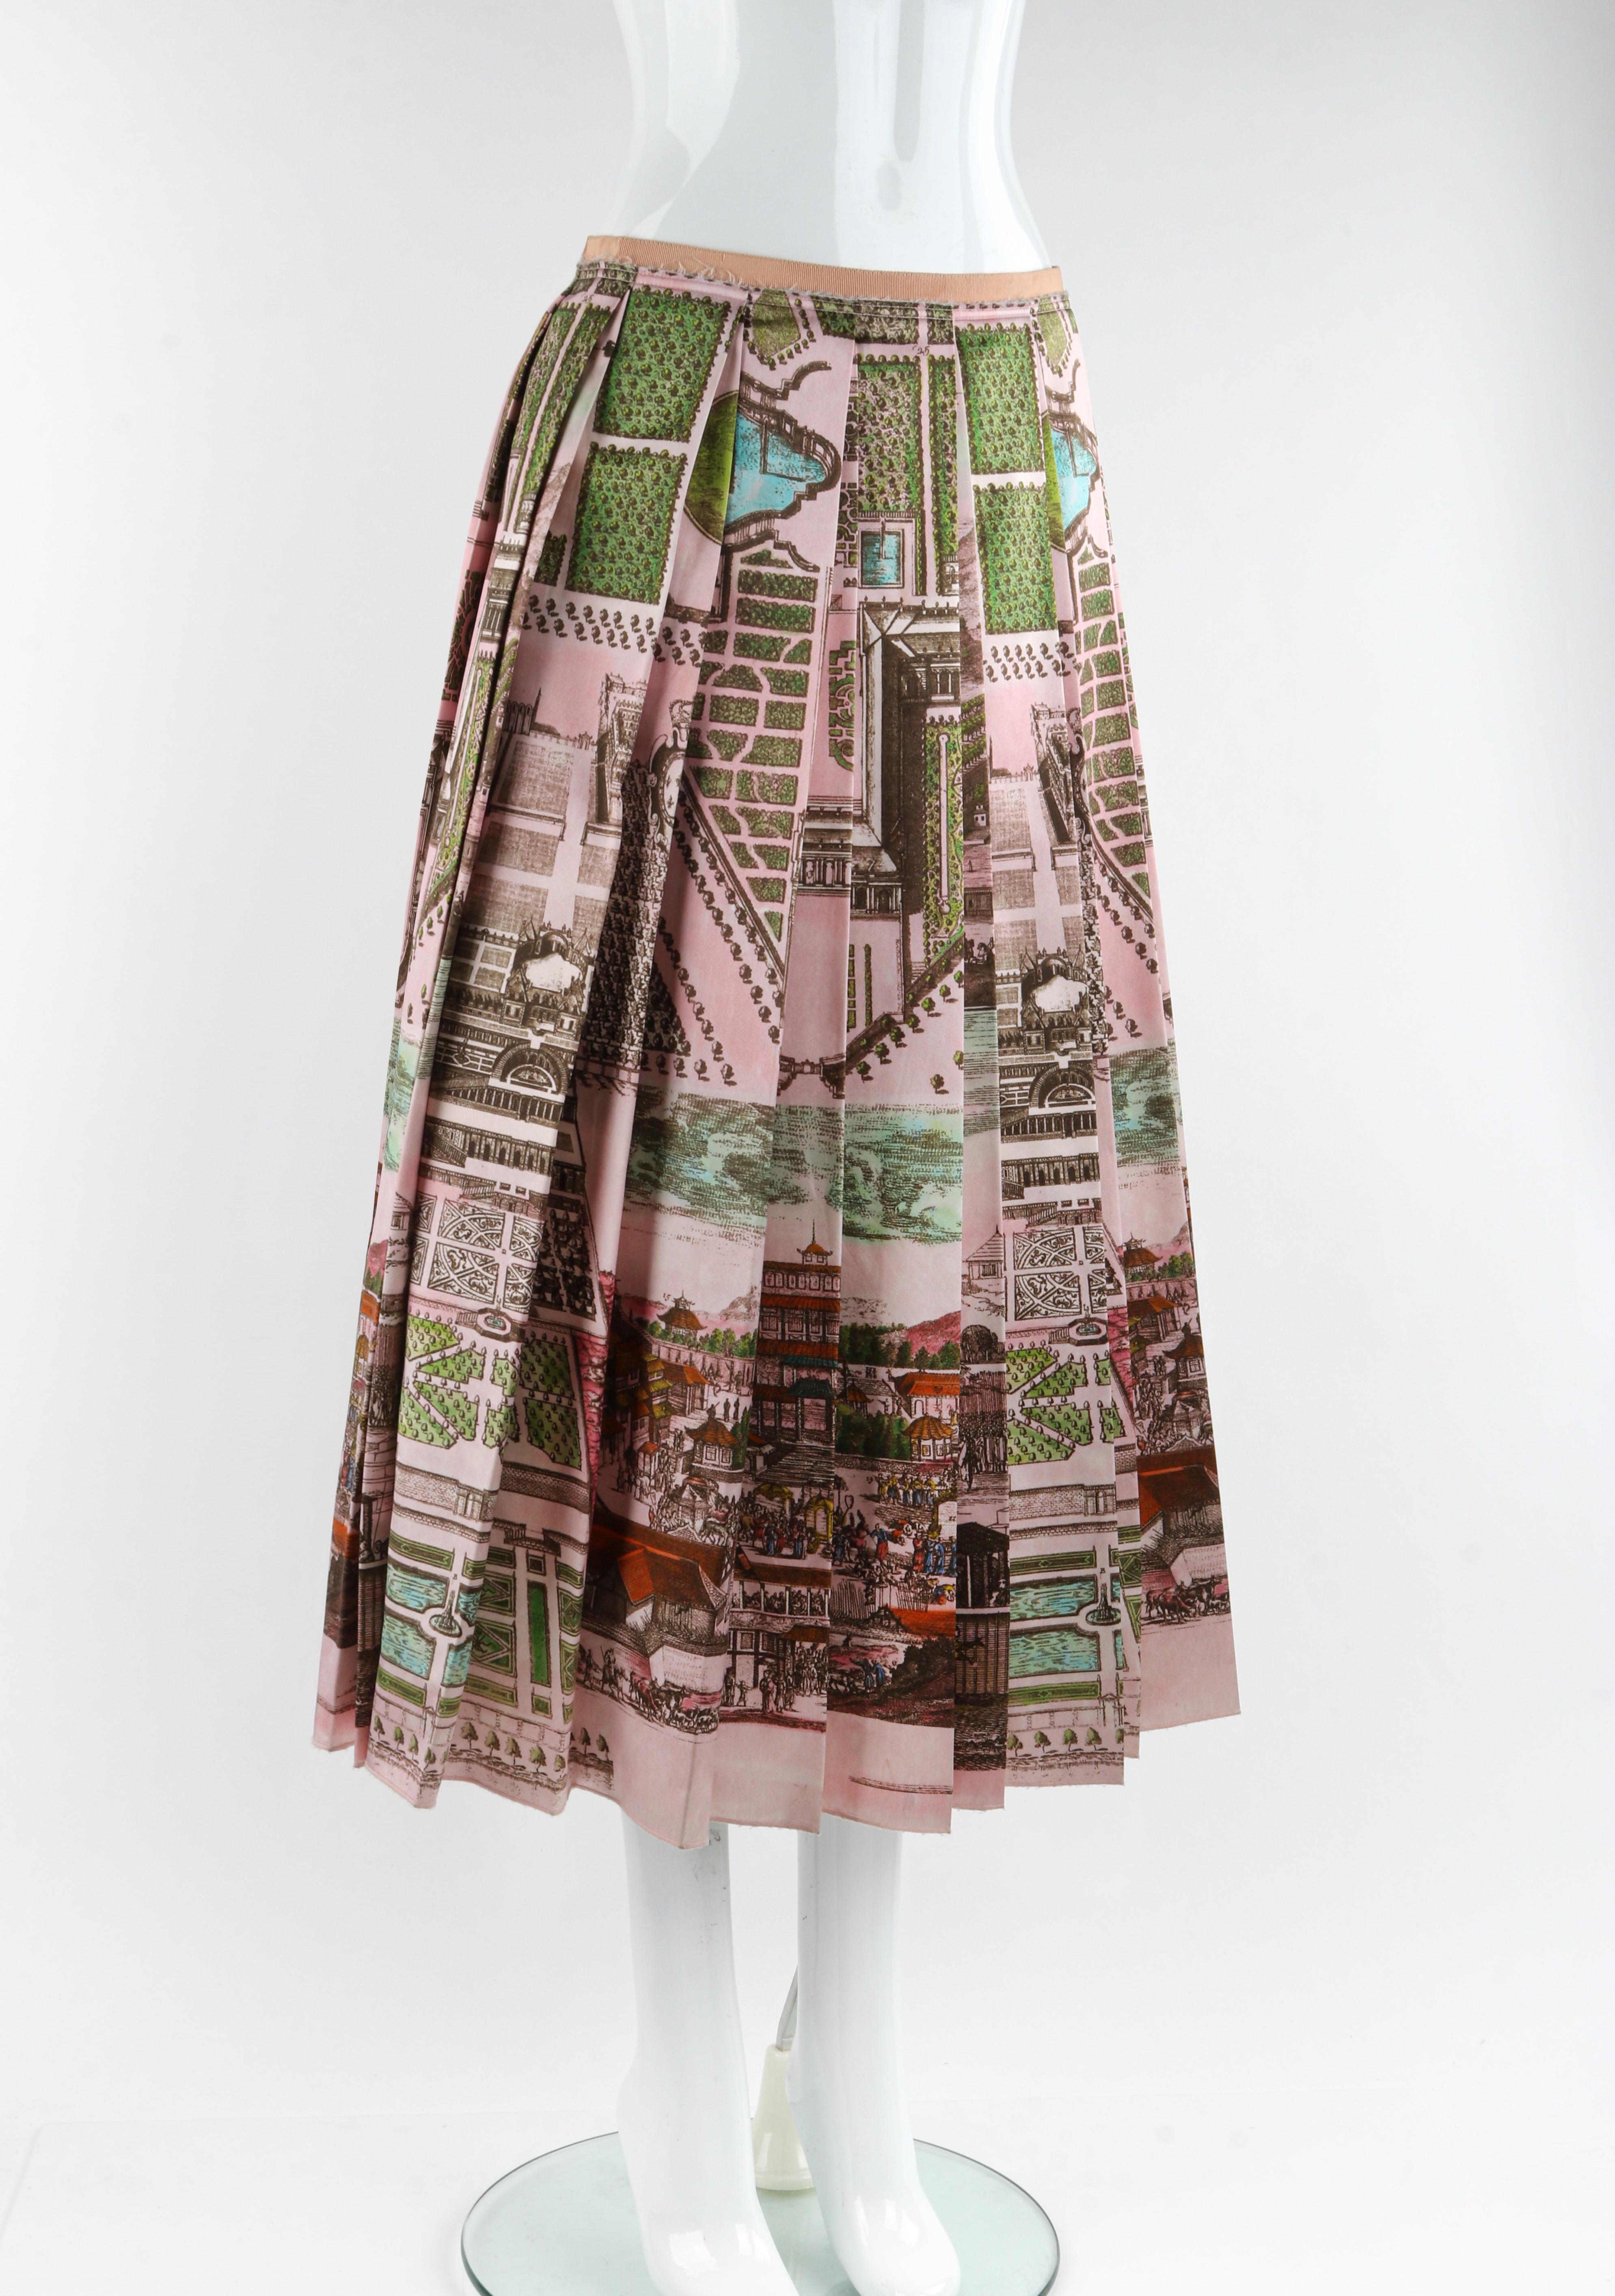 GUCCI F/W 2016 Pink Multicolor Historic Garden Aerial Map Print Pleated Midi Skirt

Brand / Manufacturer: Gucci
Collection: F/W 2016
Designer: Alessandro Michele
Style: Midi Skirt
Color(s): Shades of pink, blue, green, black, brown, yellow,